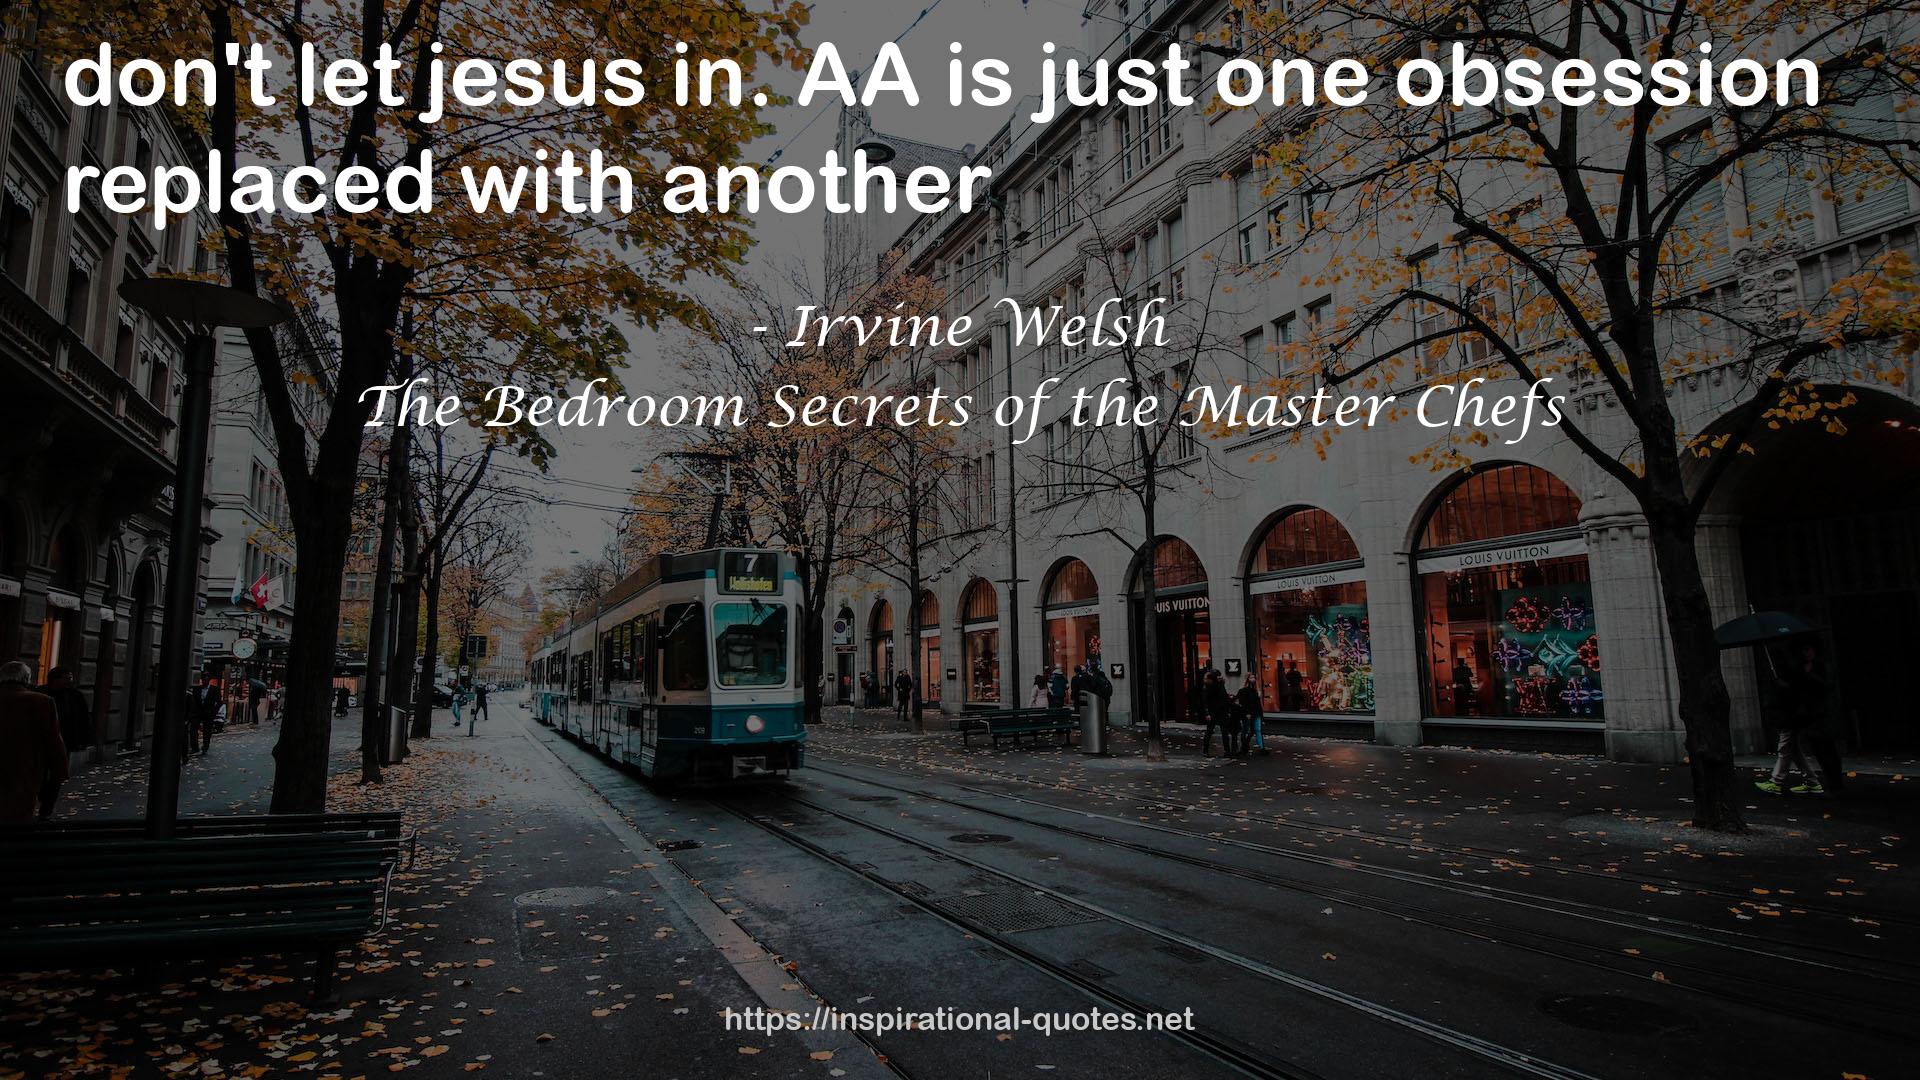 The Bedroom Secrets of the Master Chefs QUOTES